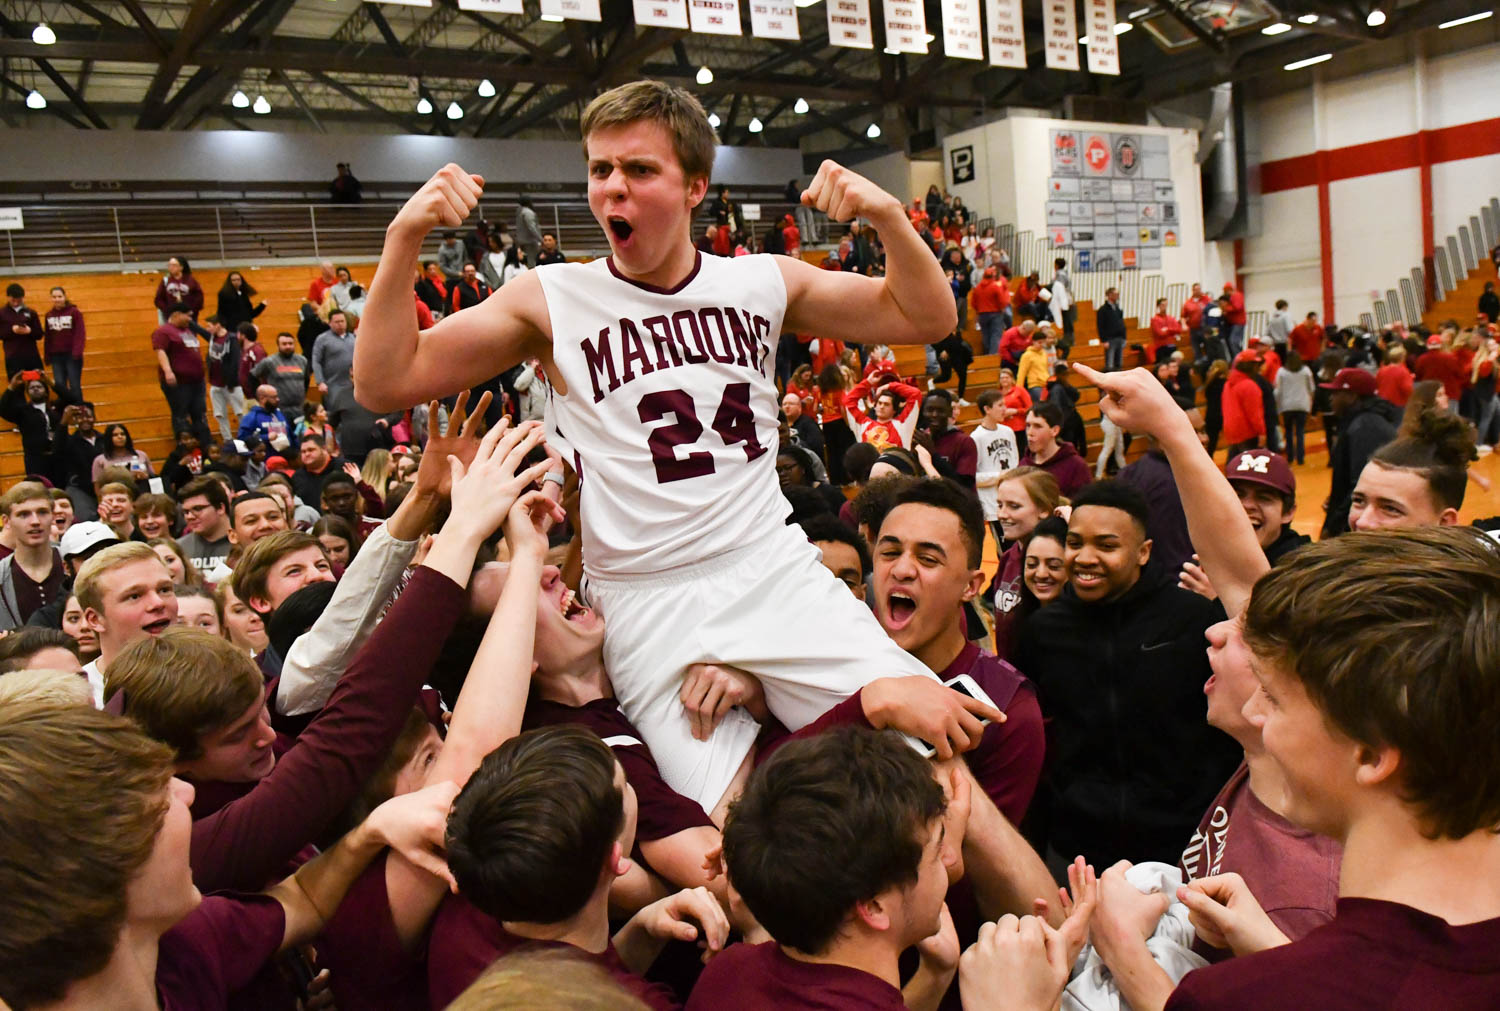 Moline fans lift Ethan Lapaczonek (24) on their shoulders after the Maroons defeated Rock Island, 55-43, in the Class 4A Pekin Sectional Tuesday, March 6, 2018, at Dawdy Hawkins Gym. (Todd Mizener - Dispatch/Argus) 